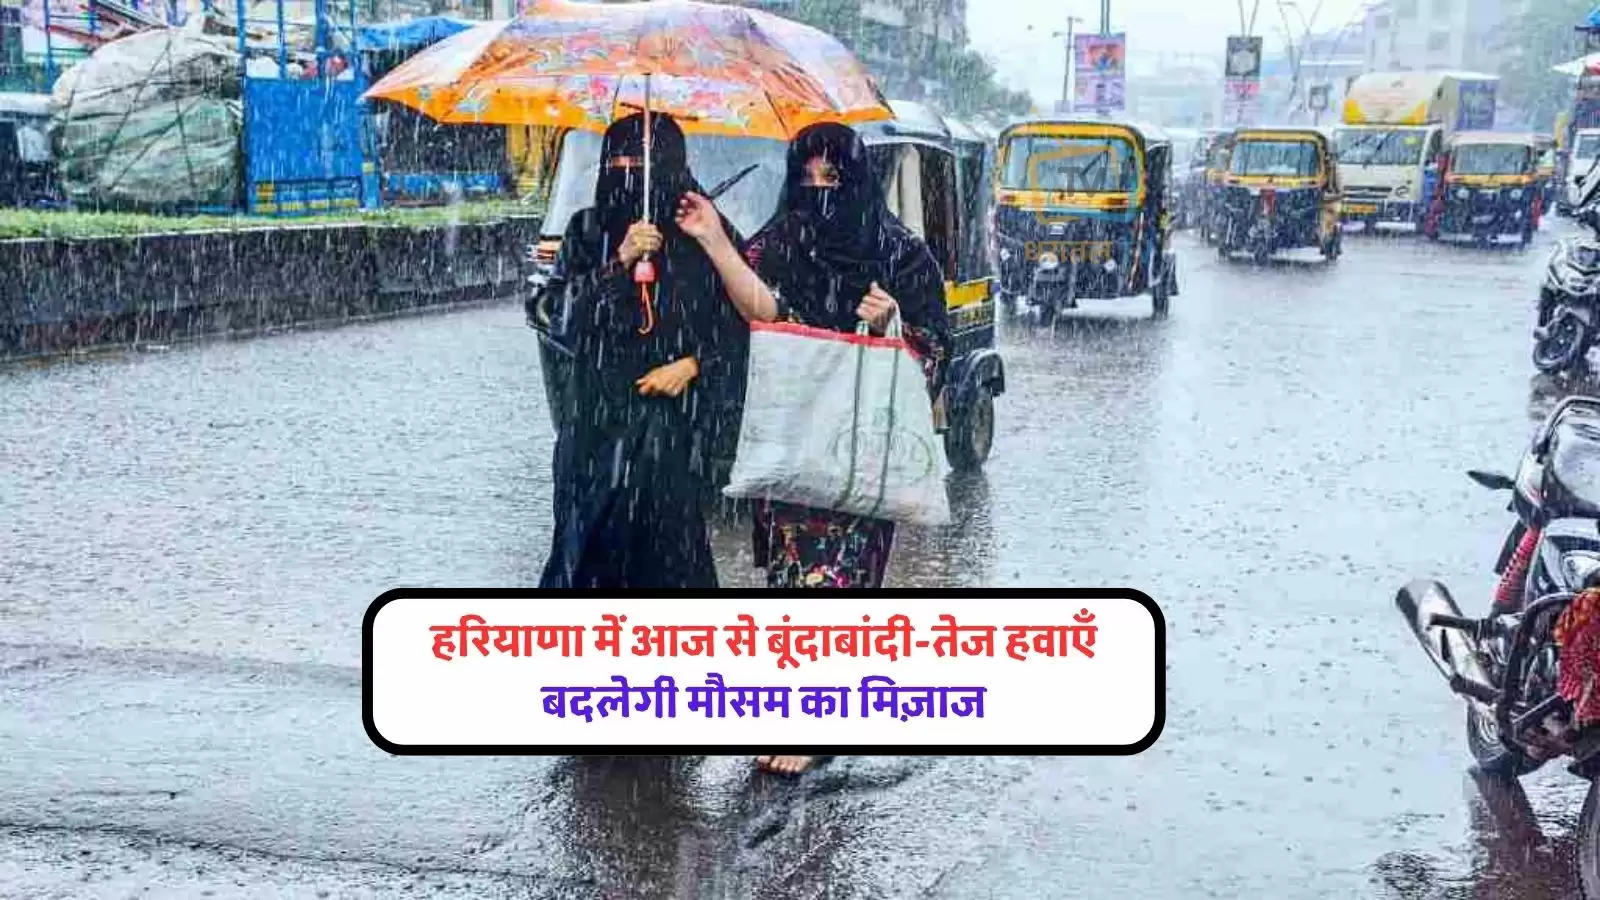 haryana-weather-alertupdate-thunderstorm-drizzle-strong-wind-temperature-will-fall-western-disturbance-active